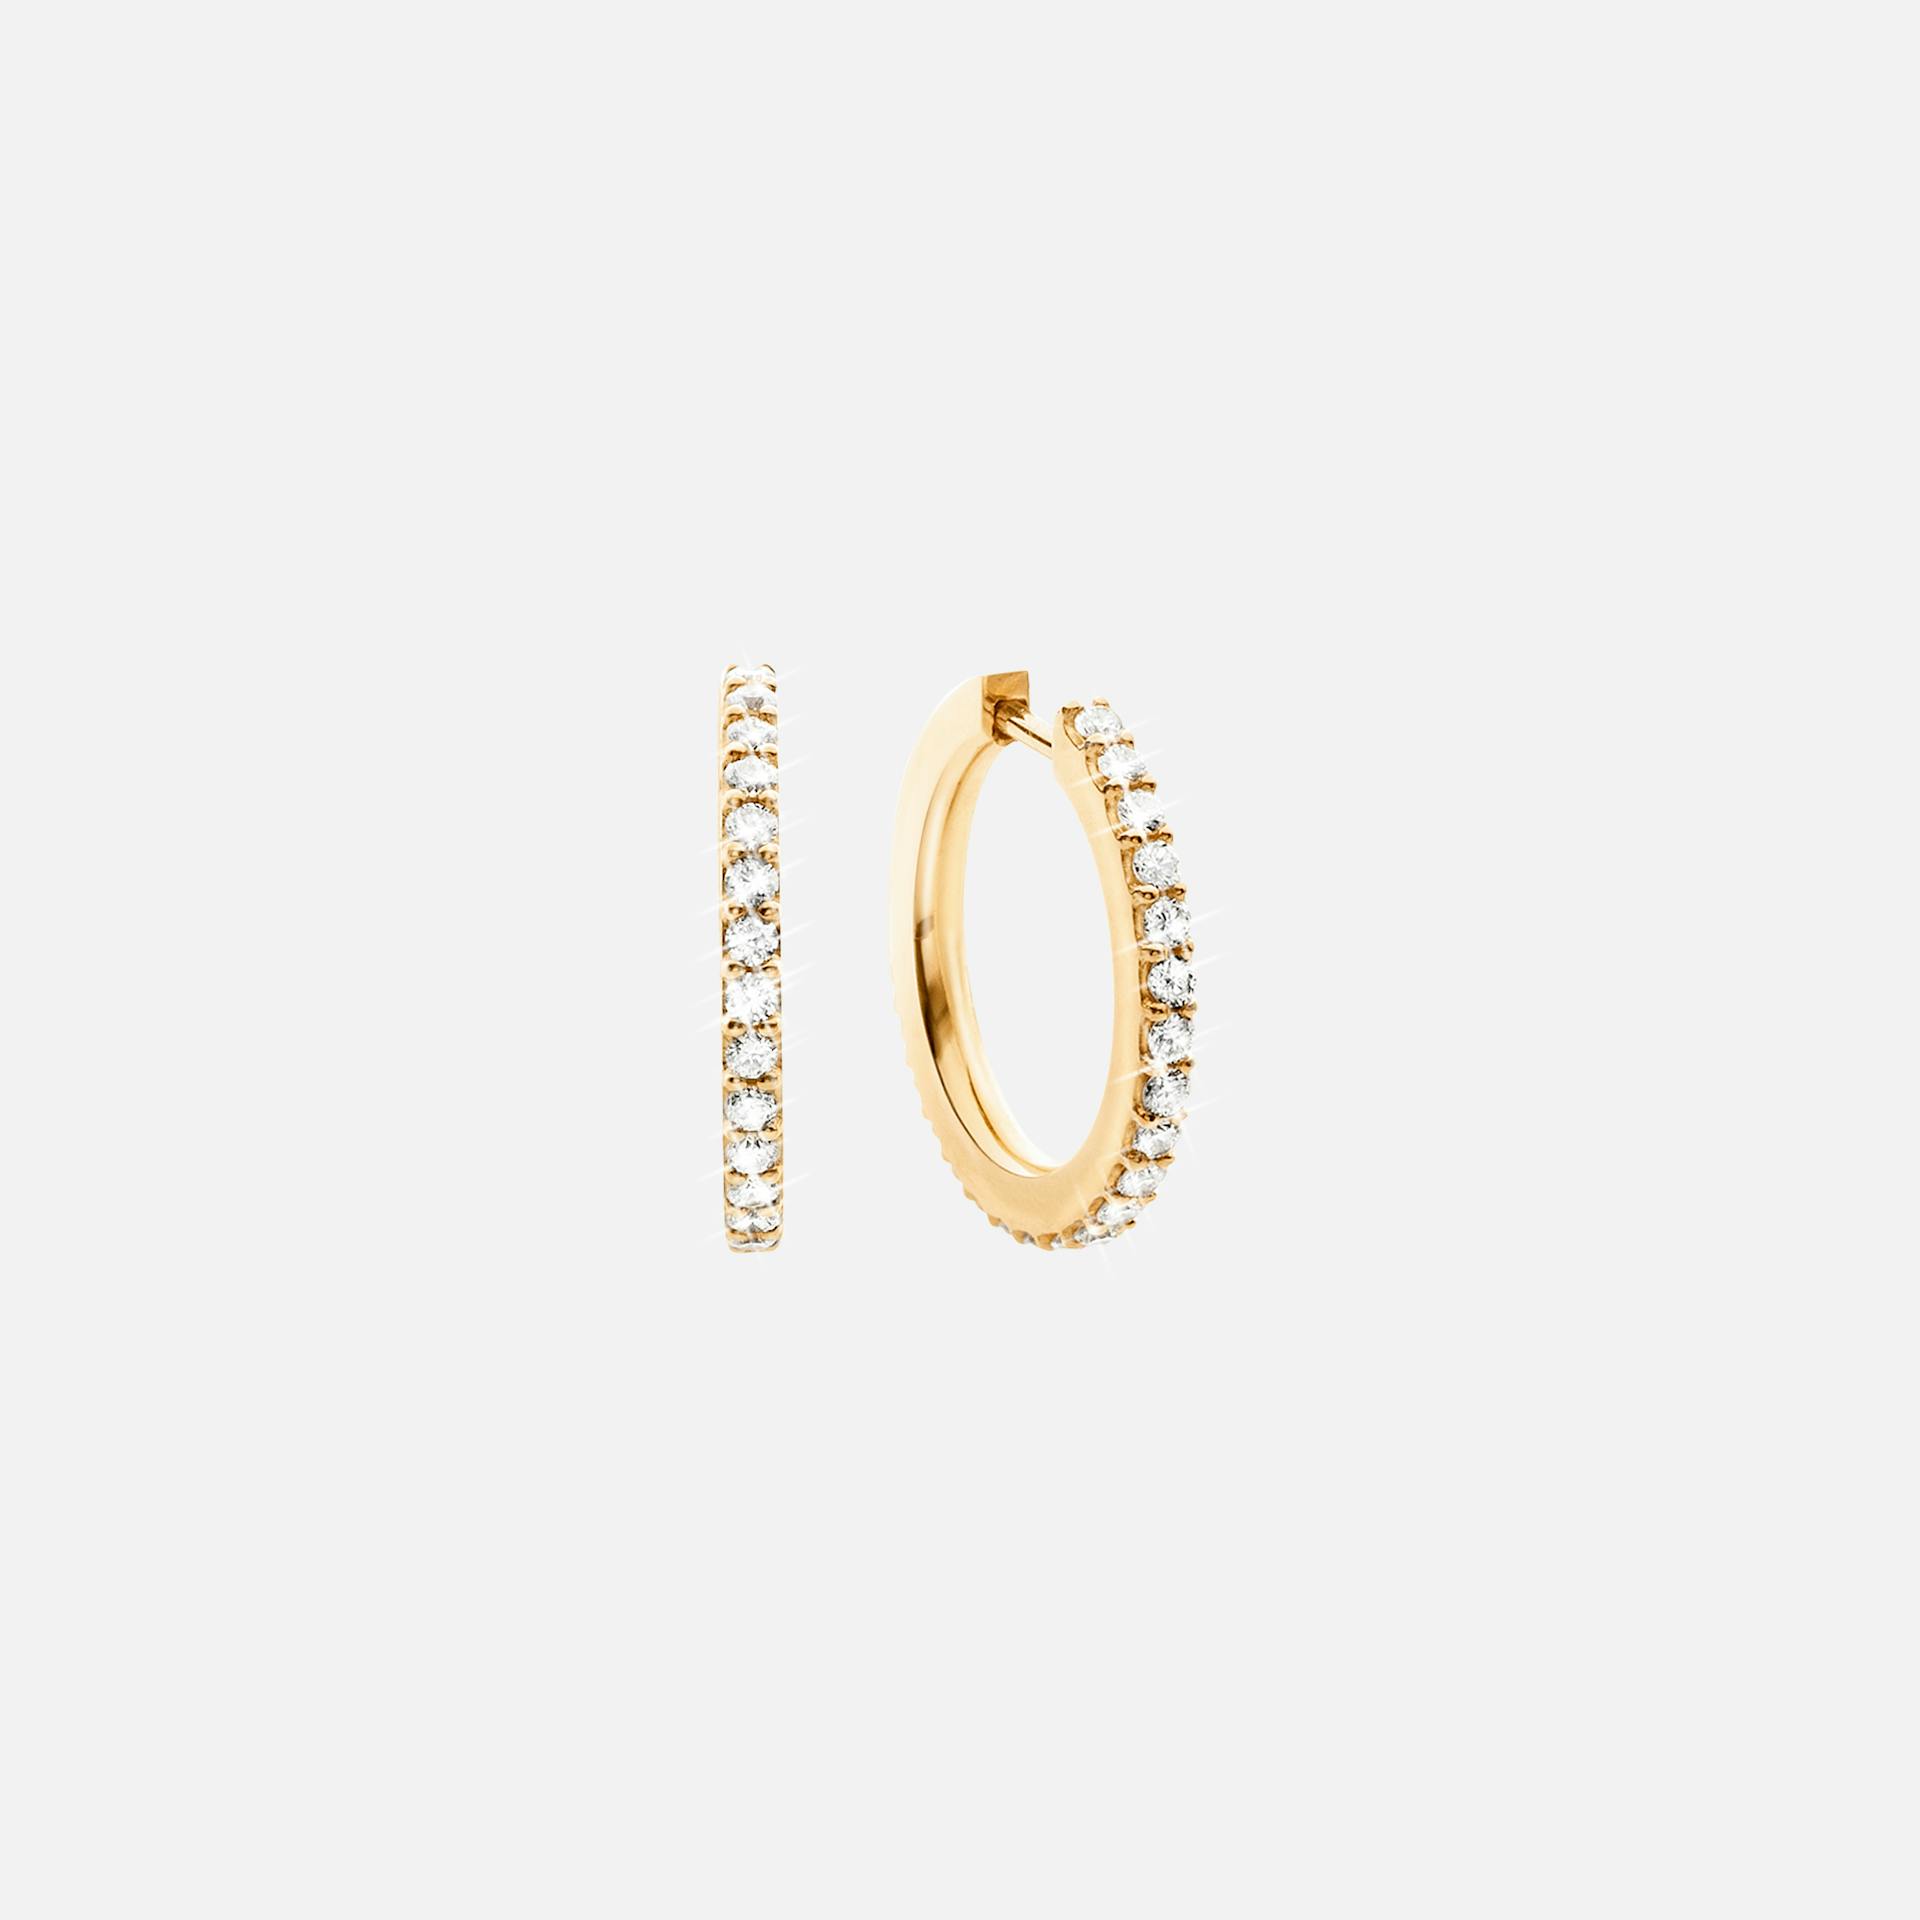 Love Bands Creol Earrings Small in Yellow Gold with Diamonds  |  Ole Lynggaard Copenhagen 